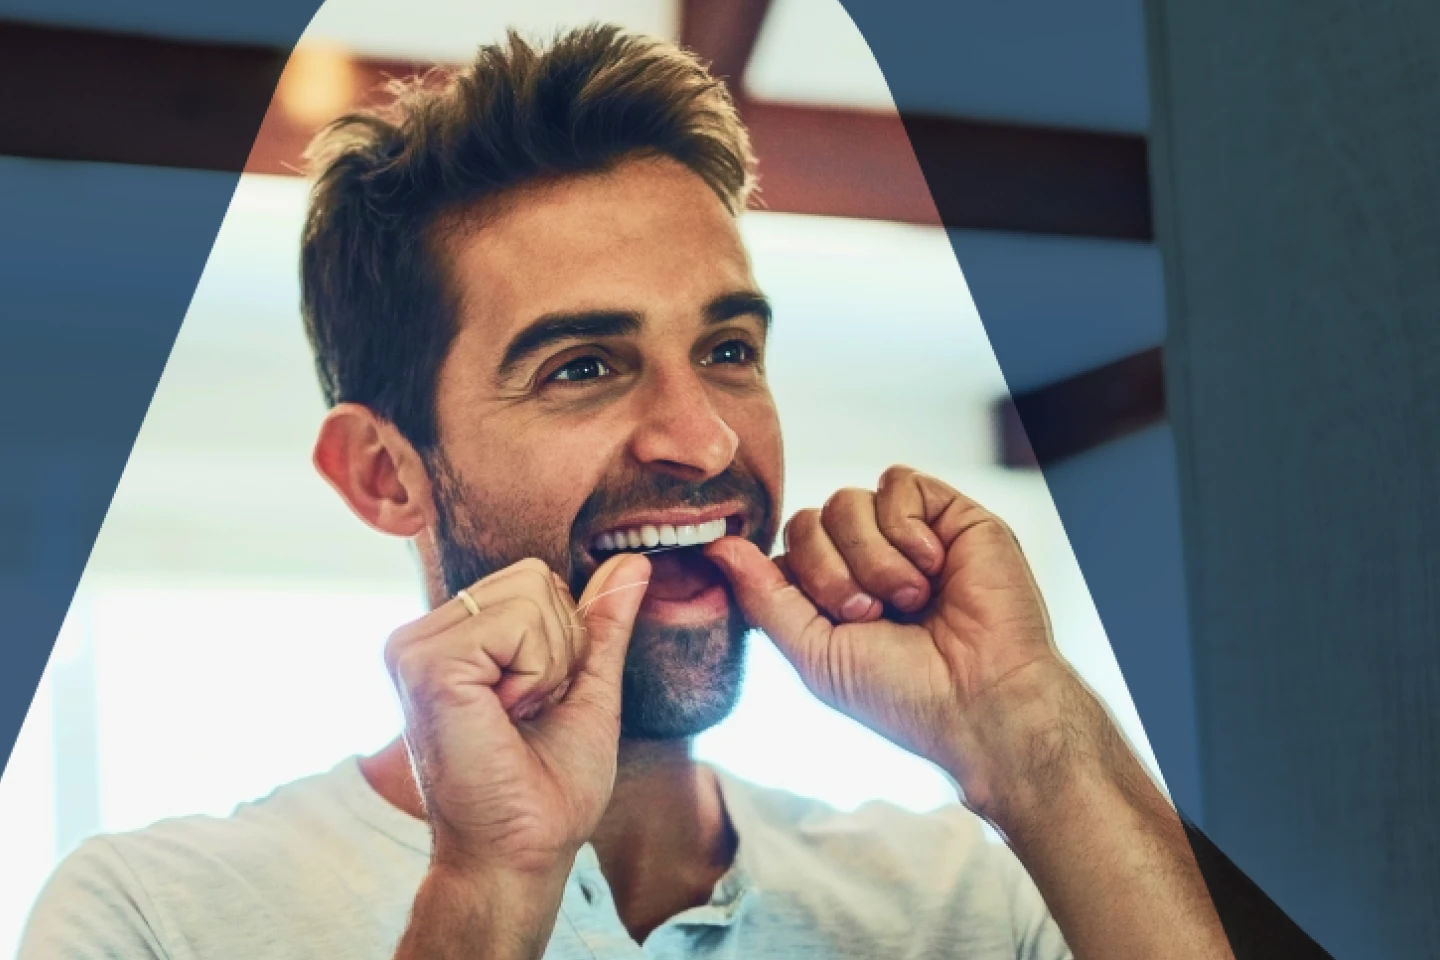 A man flossing his teeth to prevent various gum-related issues, including gingivitis with red, swollen gums, and periodontitis.